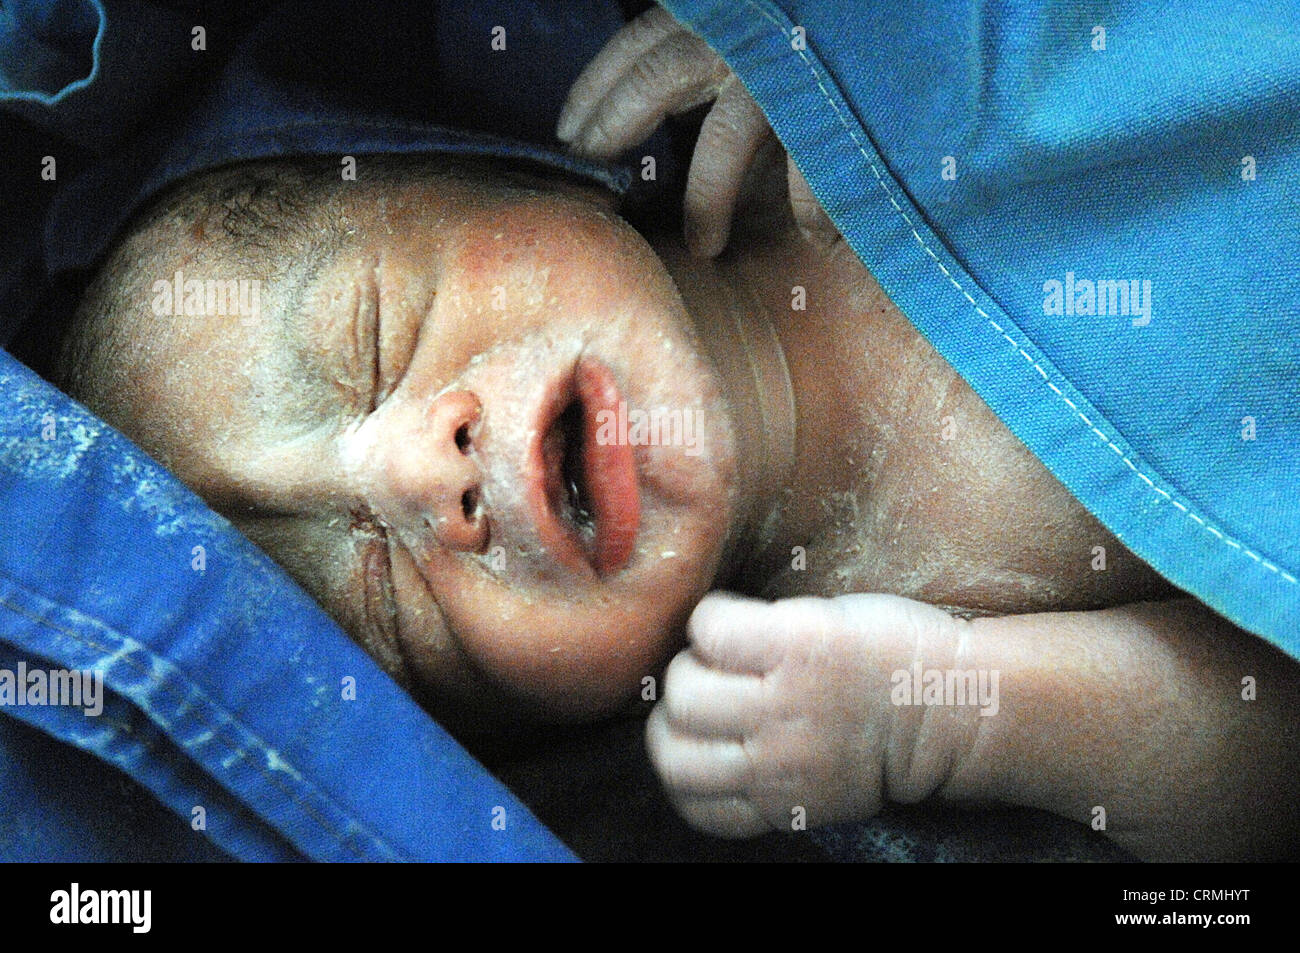 Close up of face of a new born baby soon after birth. Stock Photo